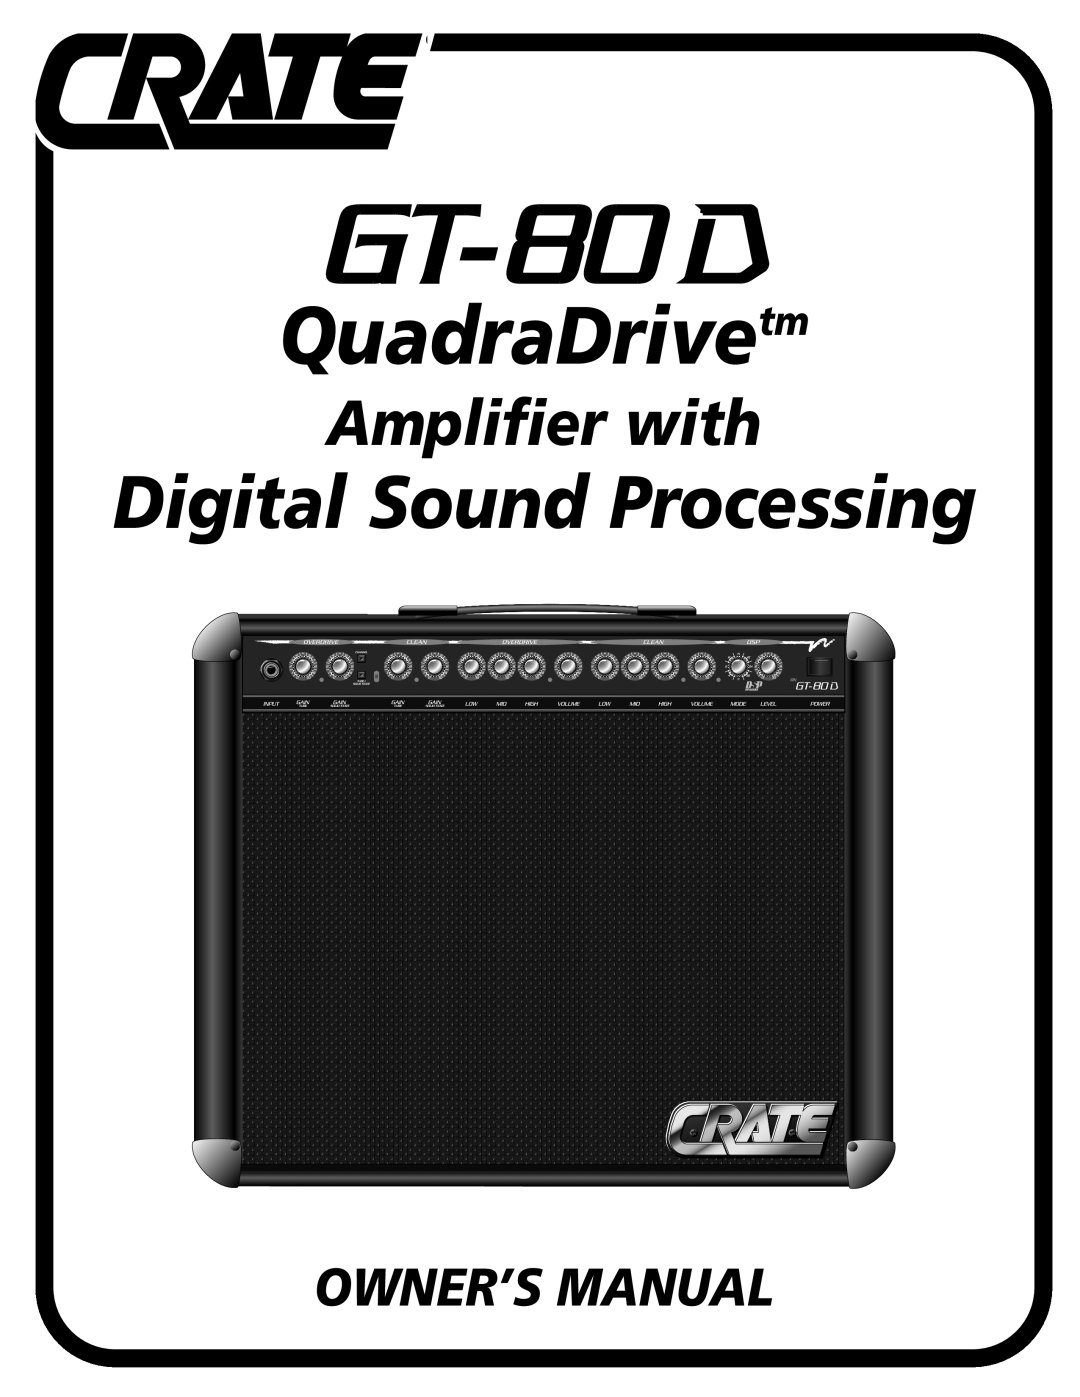 Crate Amplifiers GT-80D owner manual QuadraDrivetm, Digital Sound Processing, Amplifier with 